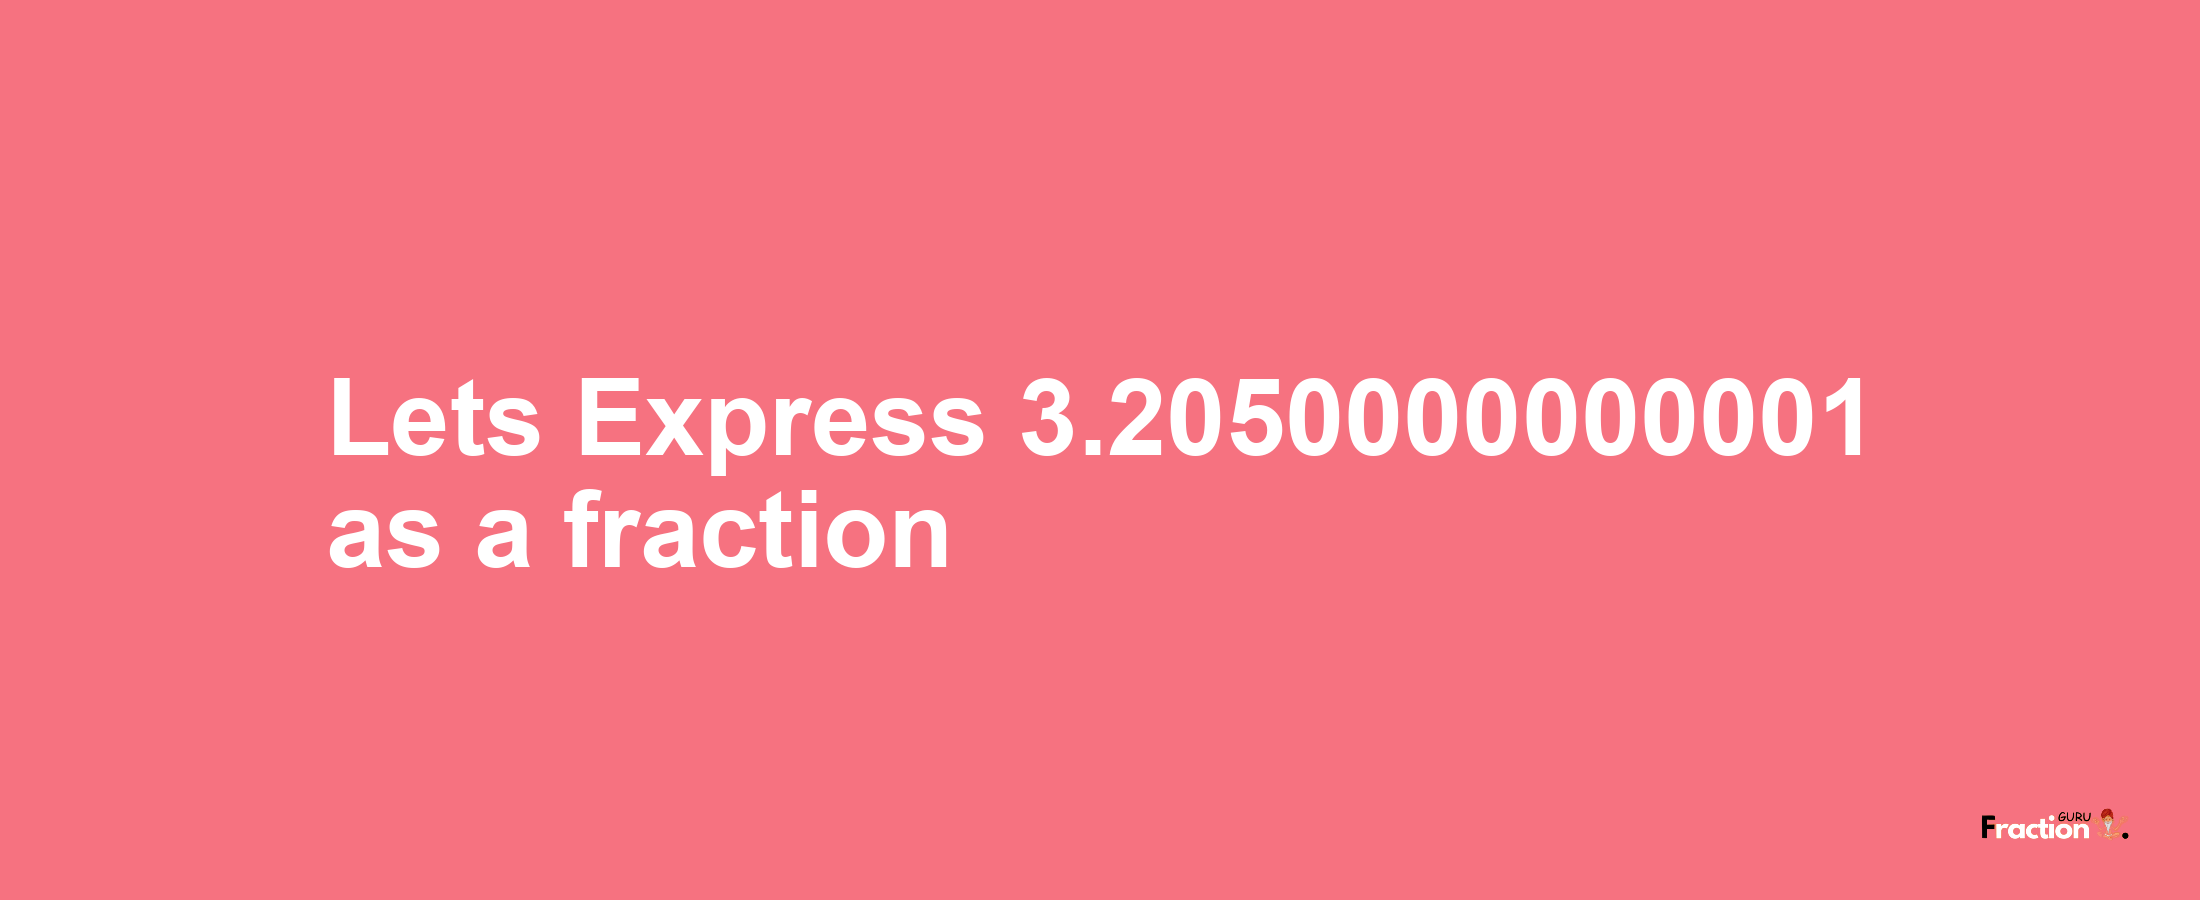 Lets Express 3.2050000000001 as afraction